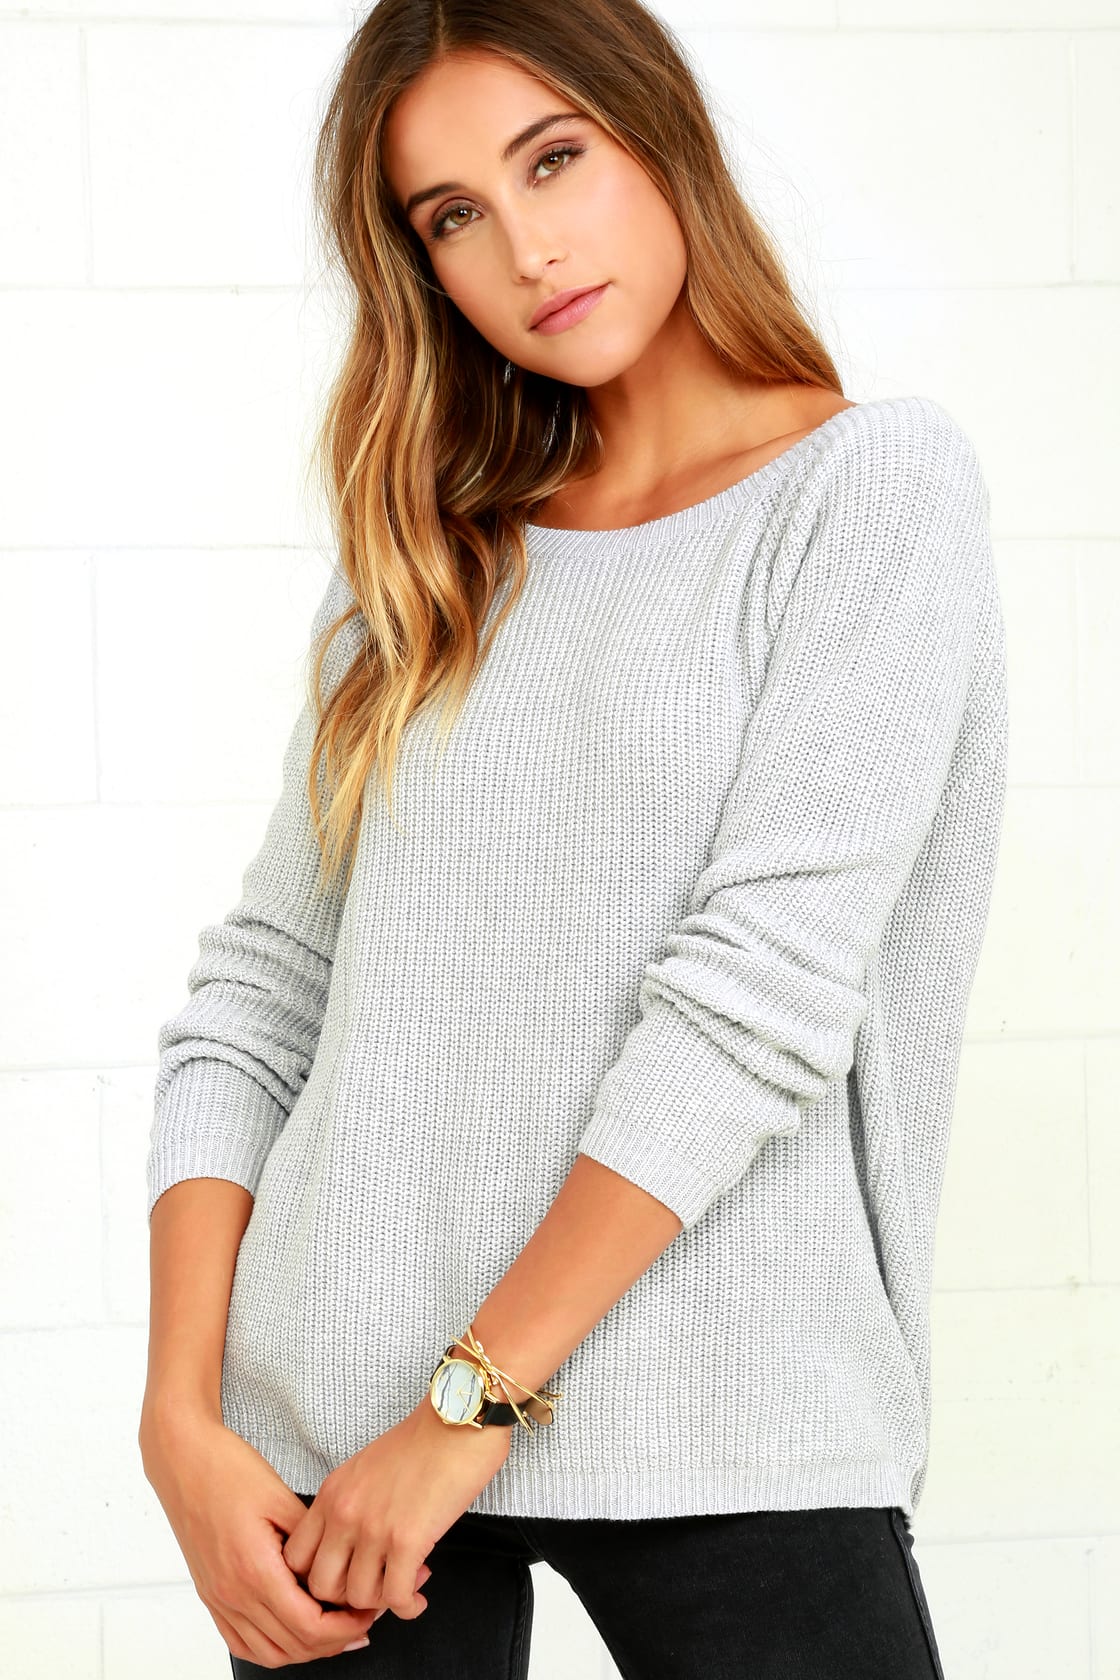 Light Grey Sweater - Knit Top - Backless Sweater - V-Back Sweater - Lulus